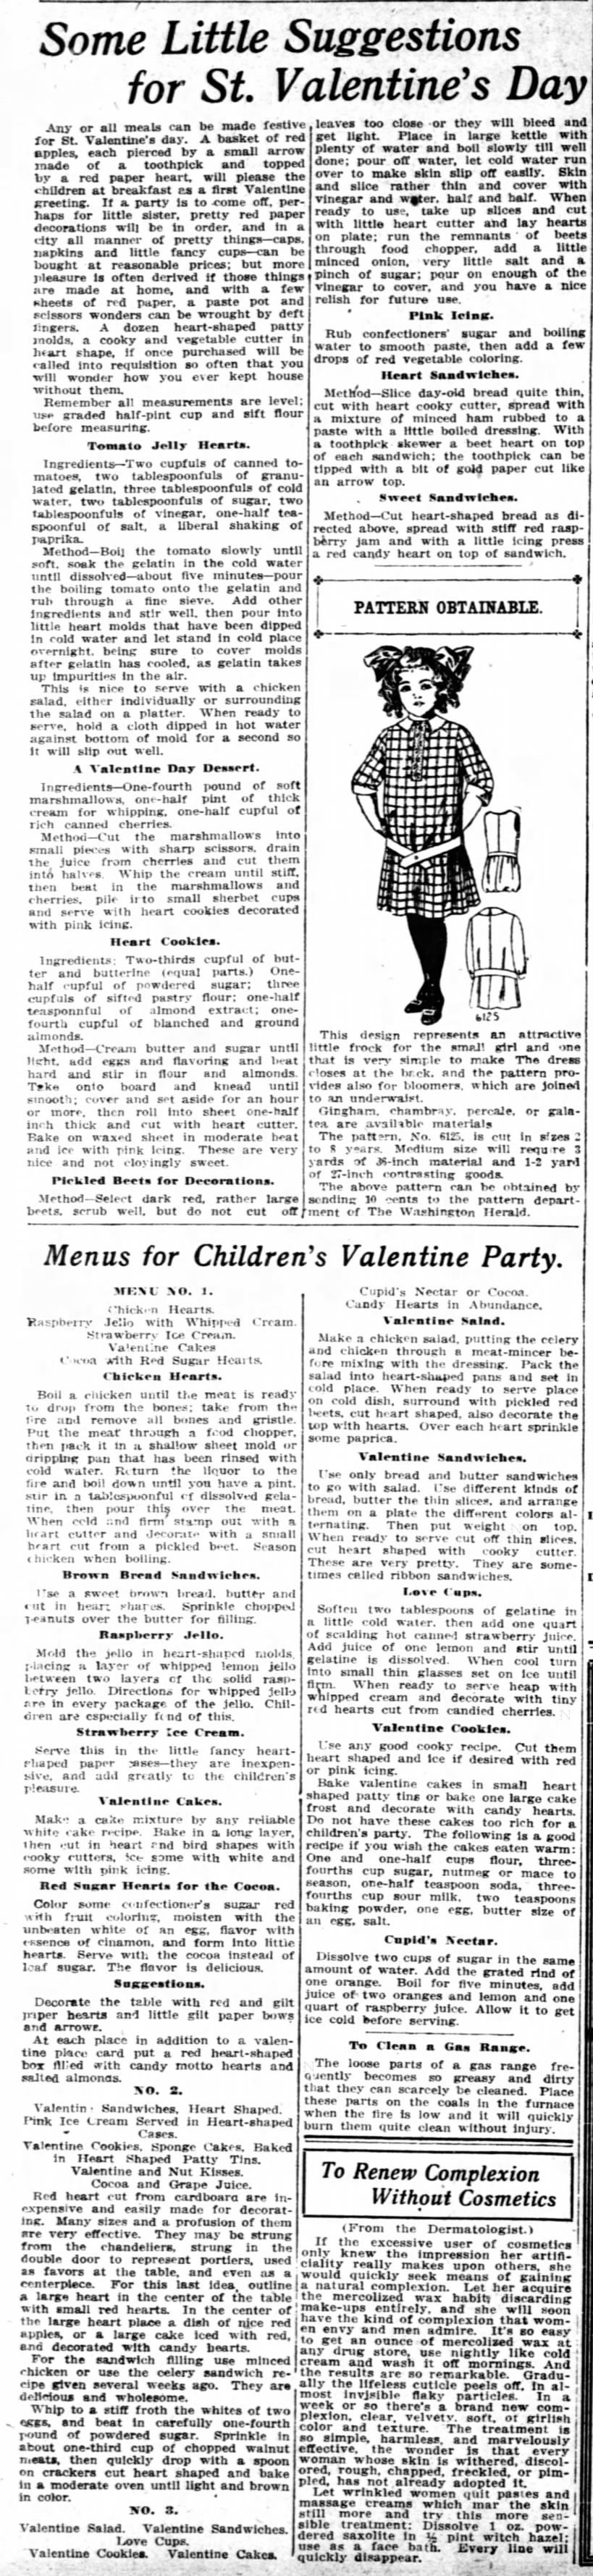 Valentine's recipes from 1913